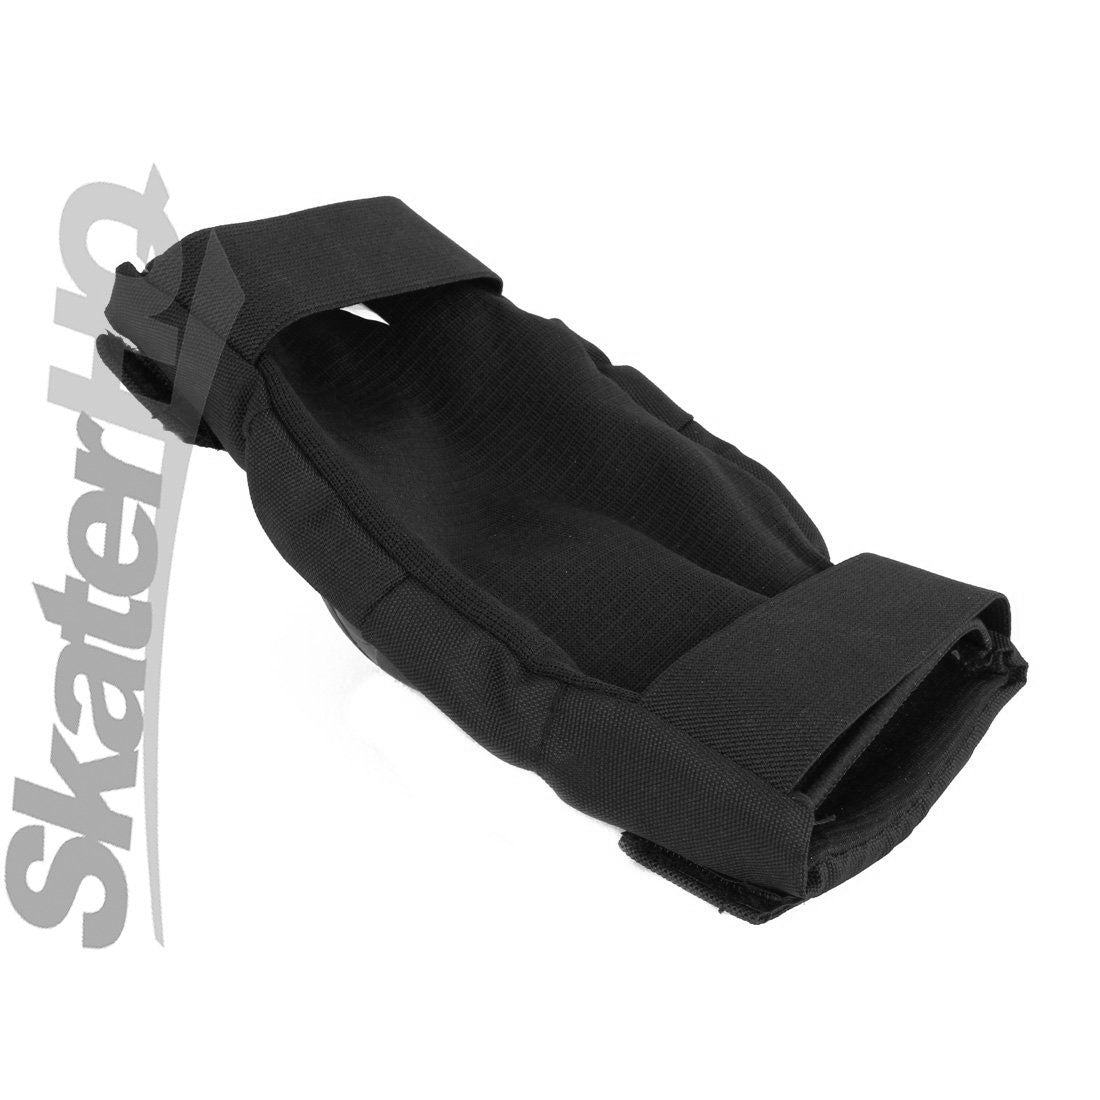 Skater HQ Elbow Pads - XLarge Protective Gear